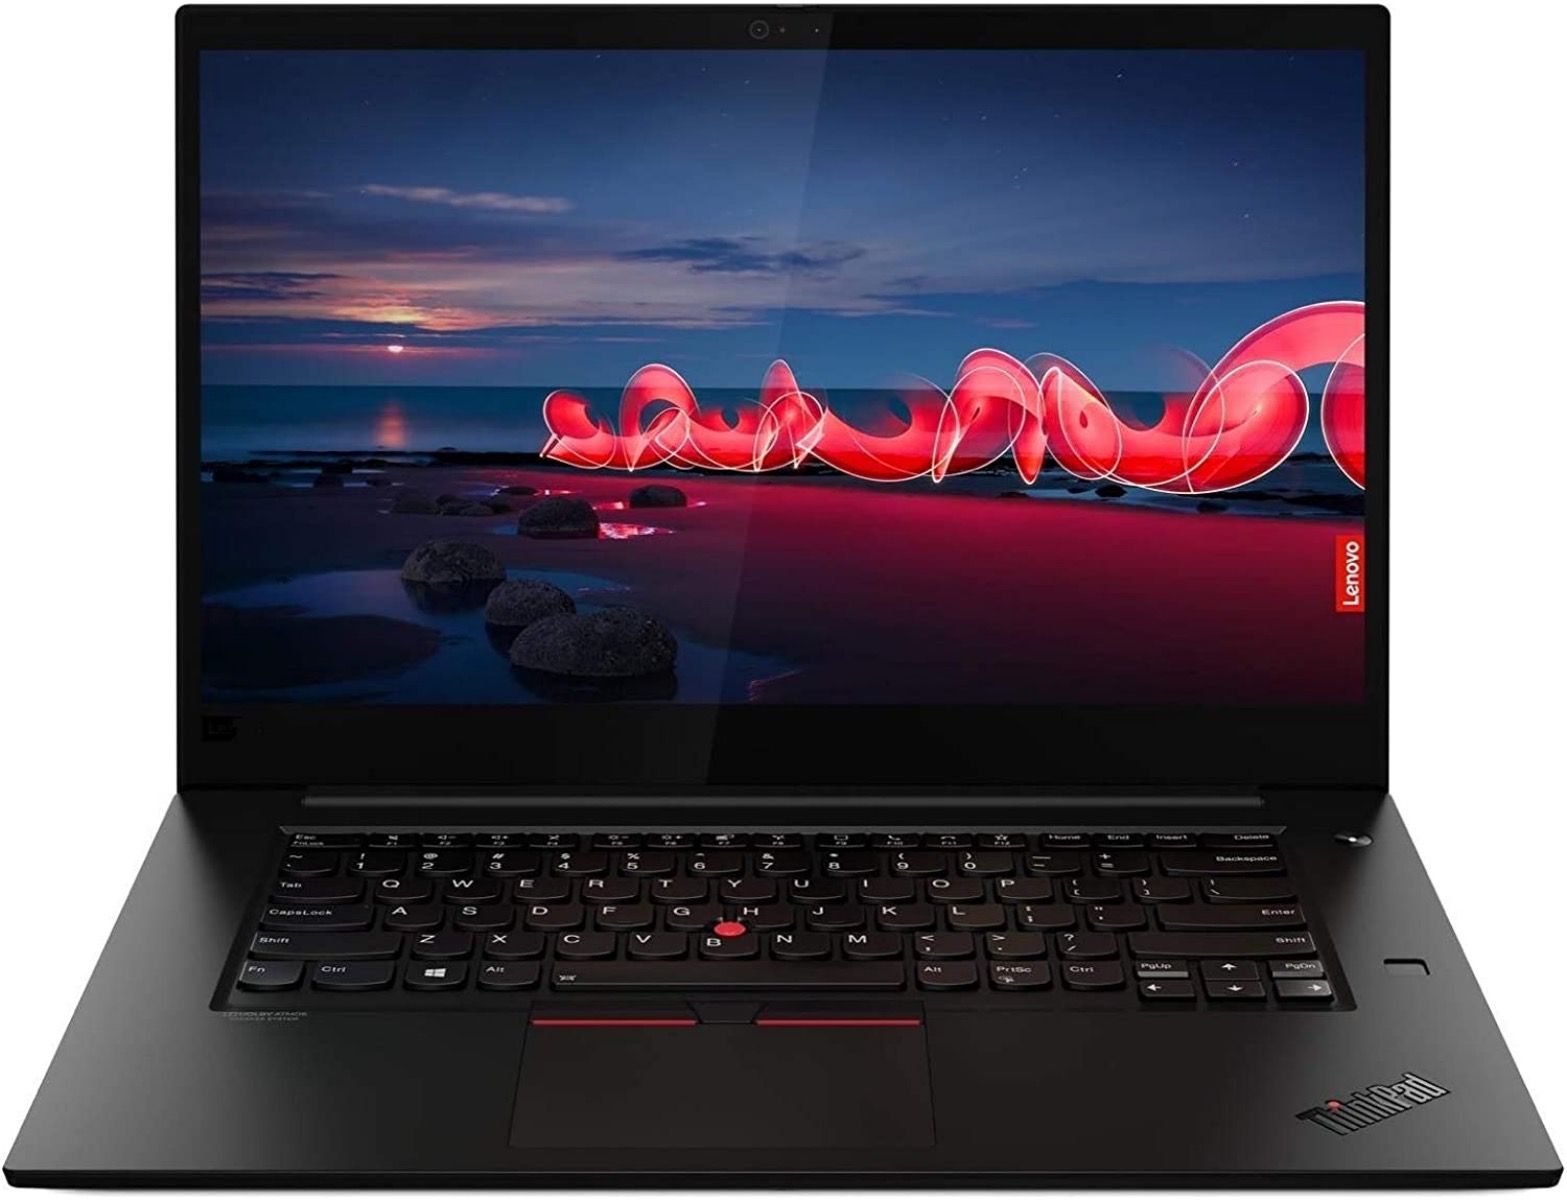 Face shot of the Lenovo Thinkpad Extreme Gen 3 with vibrant display